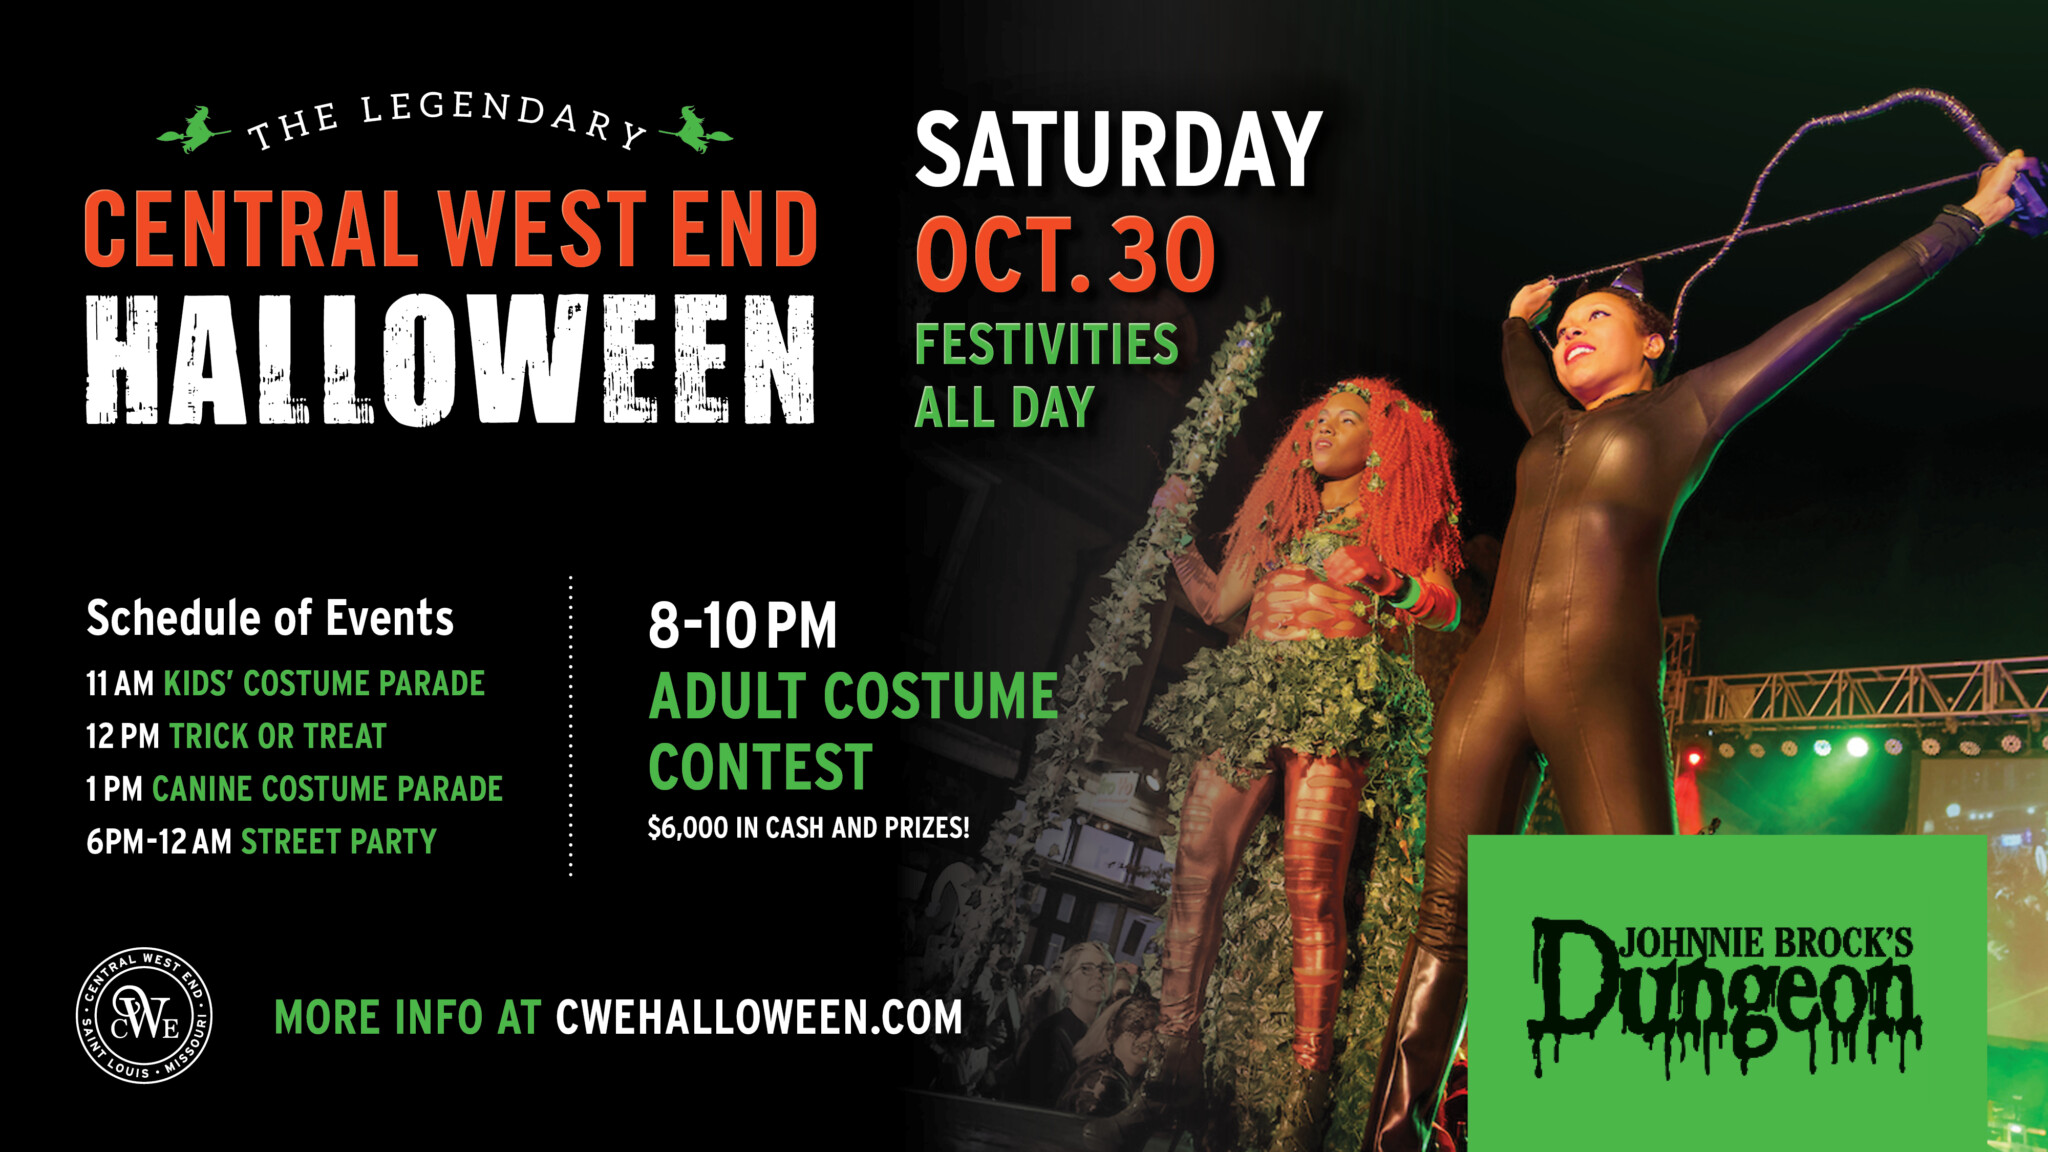 Schedule of events for Halloween in the CWE Nicki's Central West End